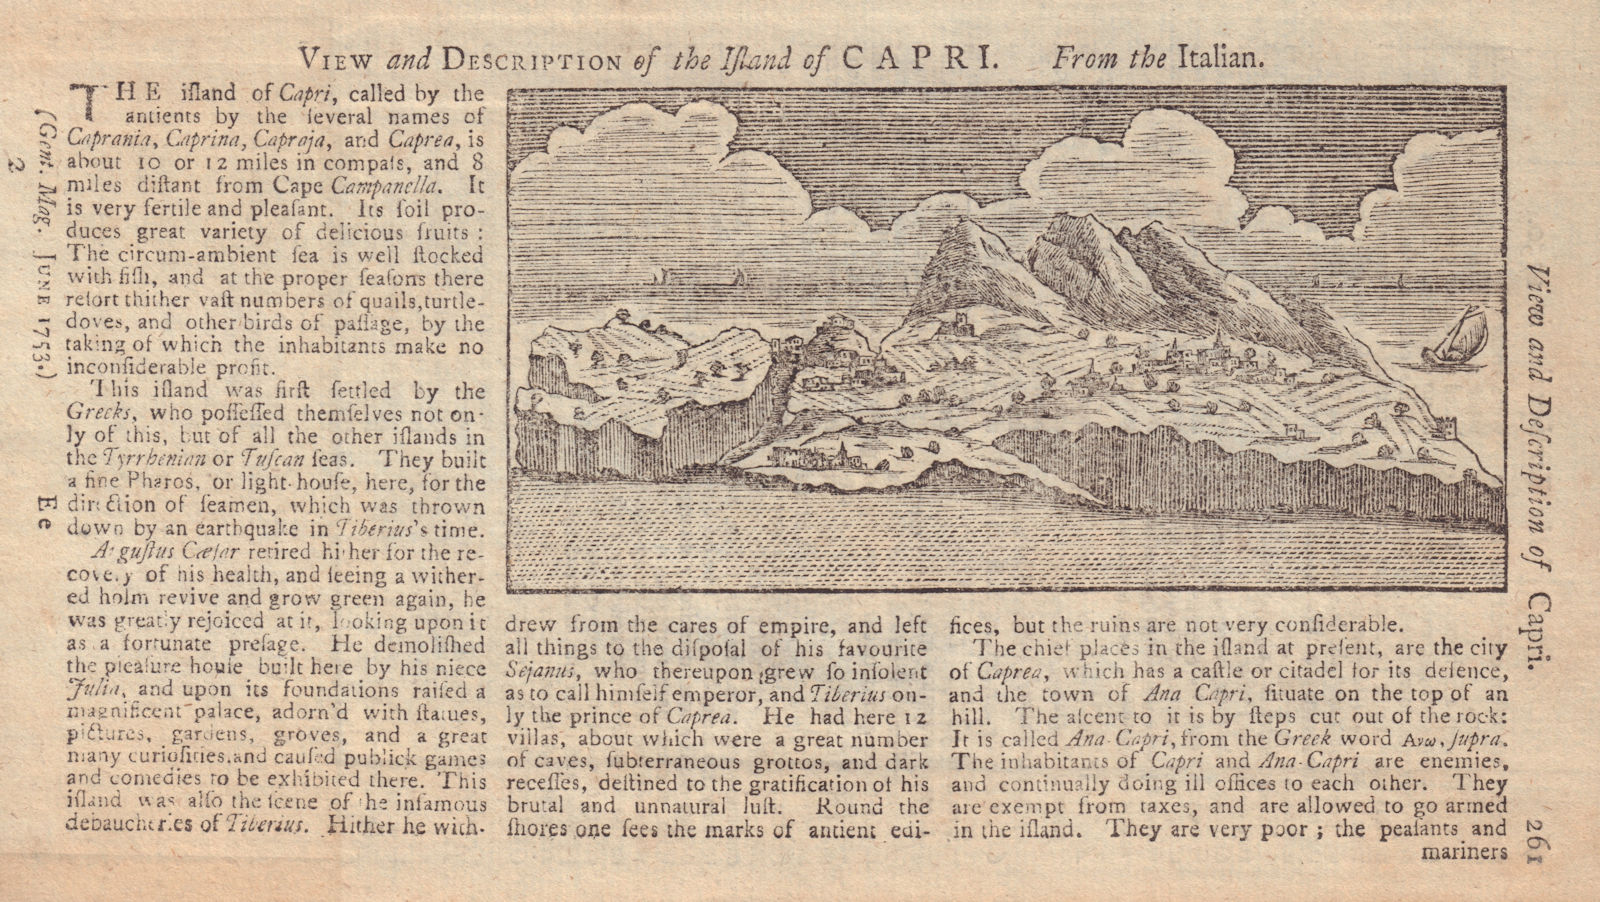 Associate Product View and Description of the Island of Capri, Italy. GENTS MAG 1753 old print